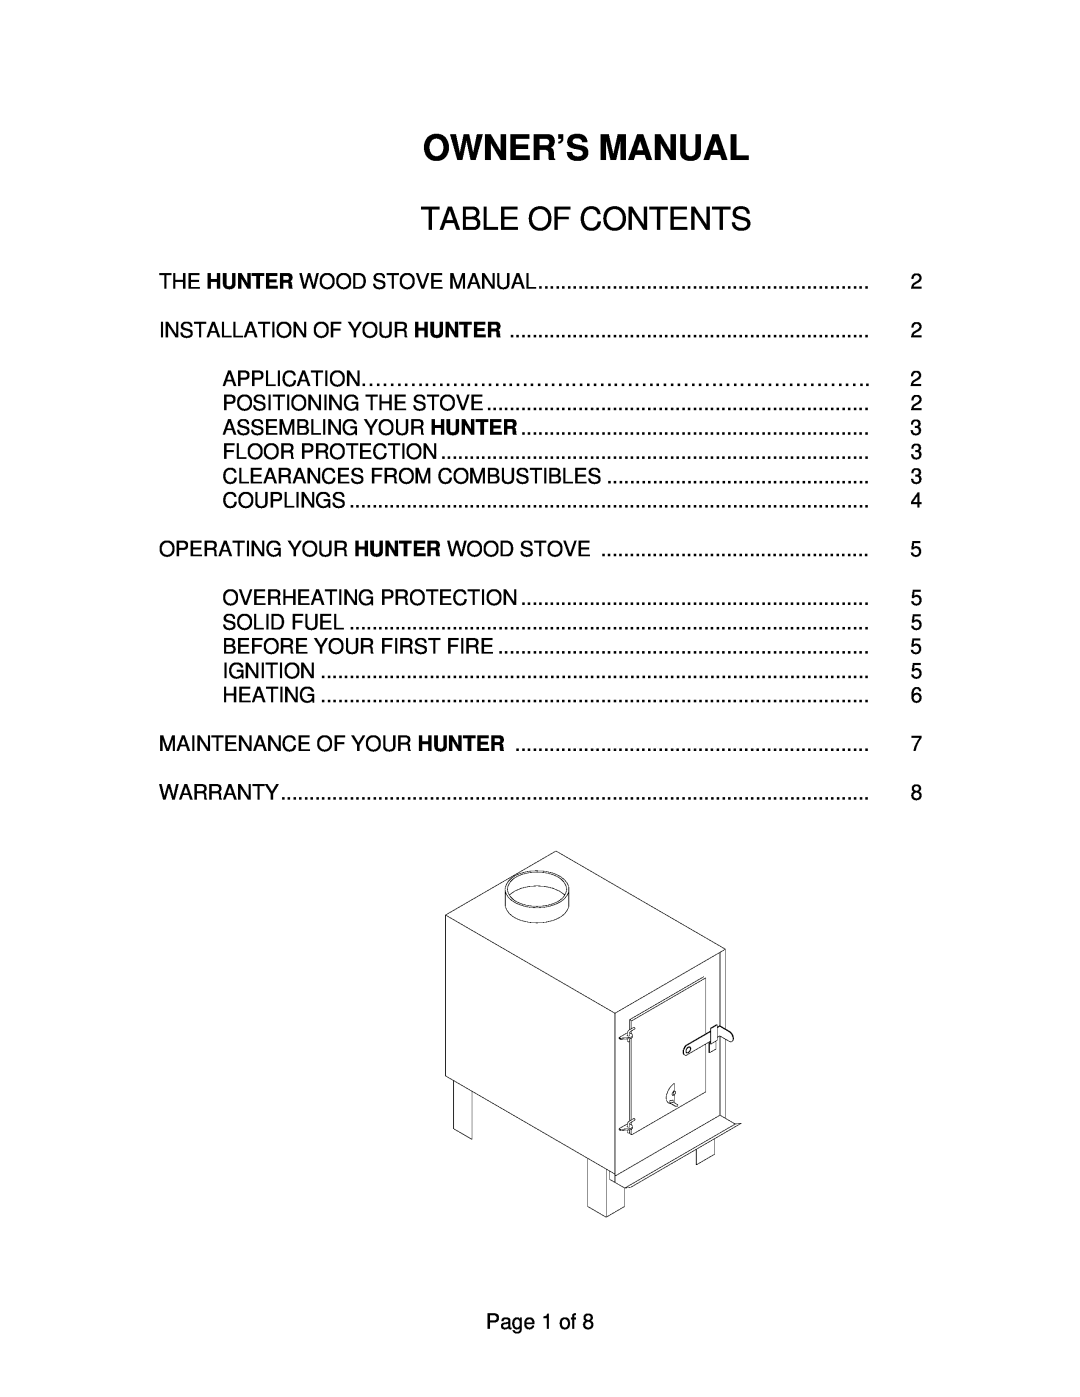 Drolet Hunter Wood Stove owner manual Owner’S Manual, Table Of Contents 